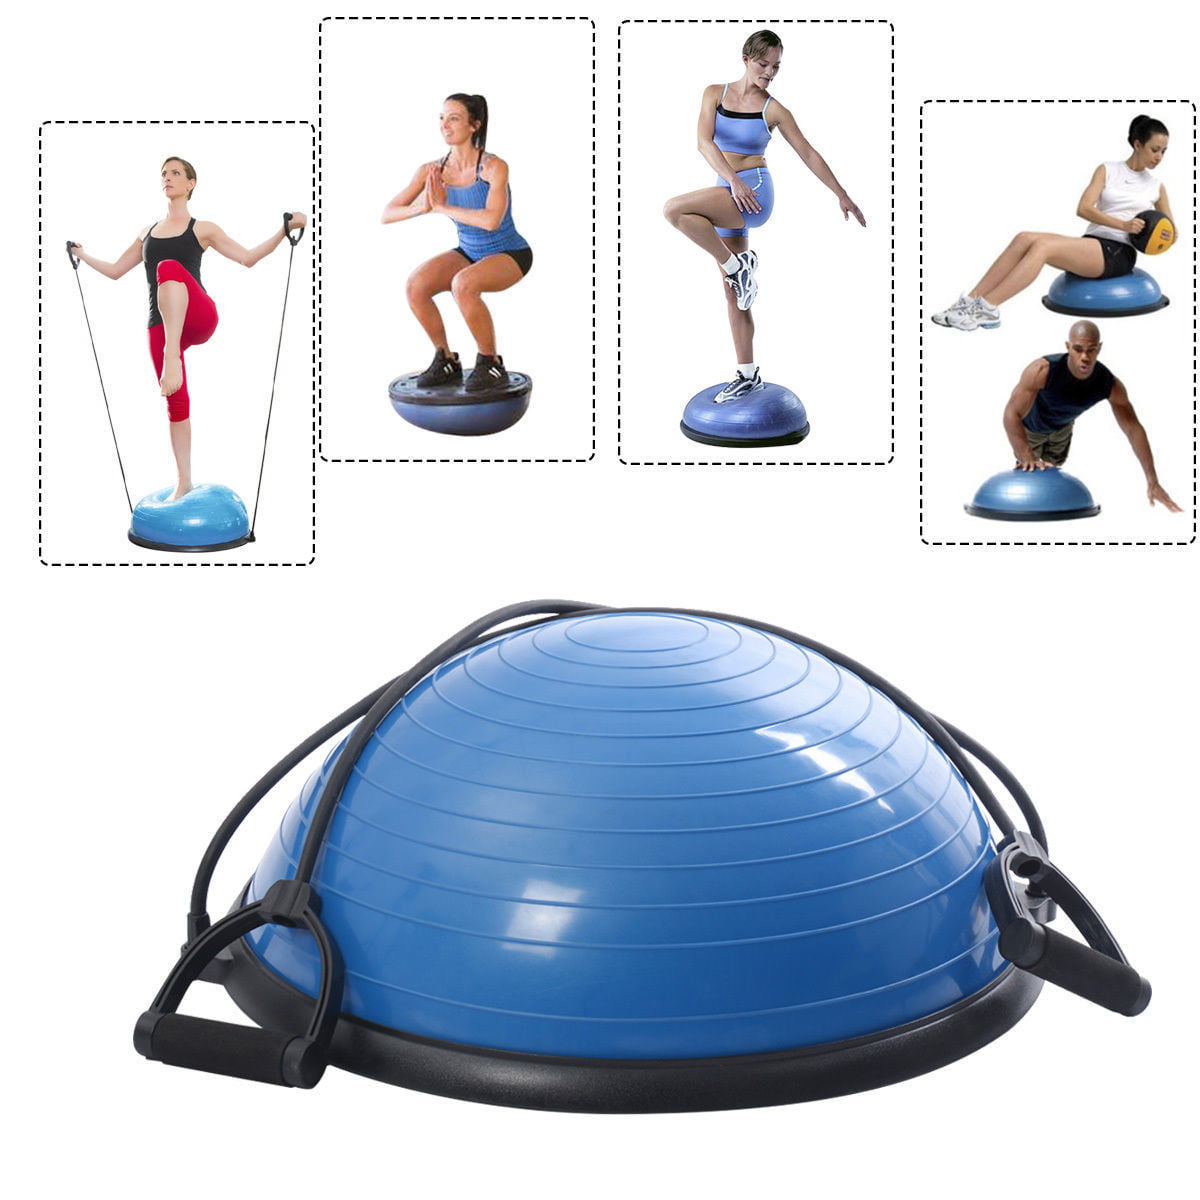 Ktaxon Fitness Blue Yoga Stability Balance Trainer Ball with Resistance Bands and Pump Exercise Workout Kit